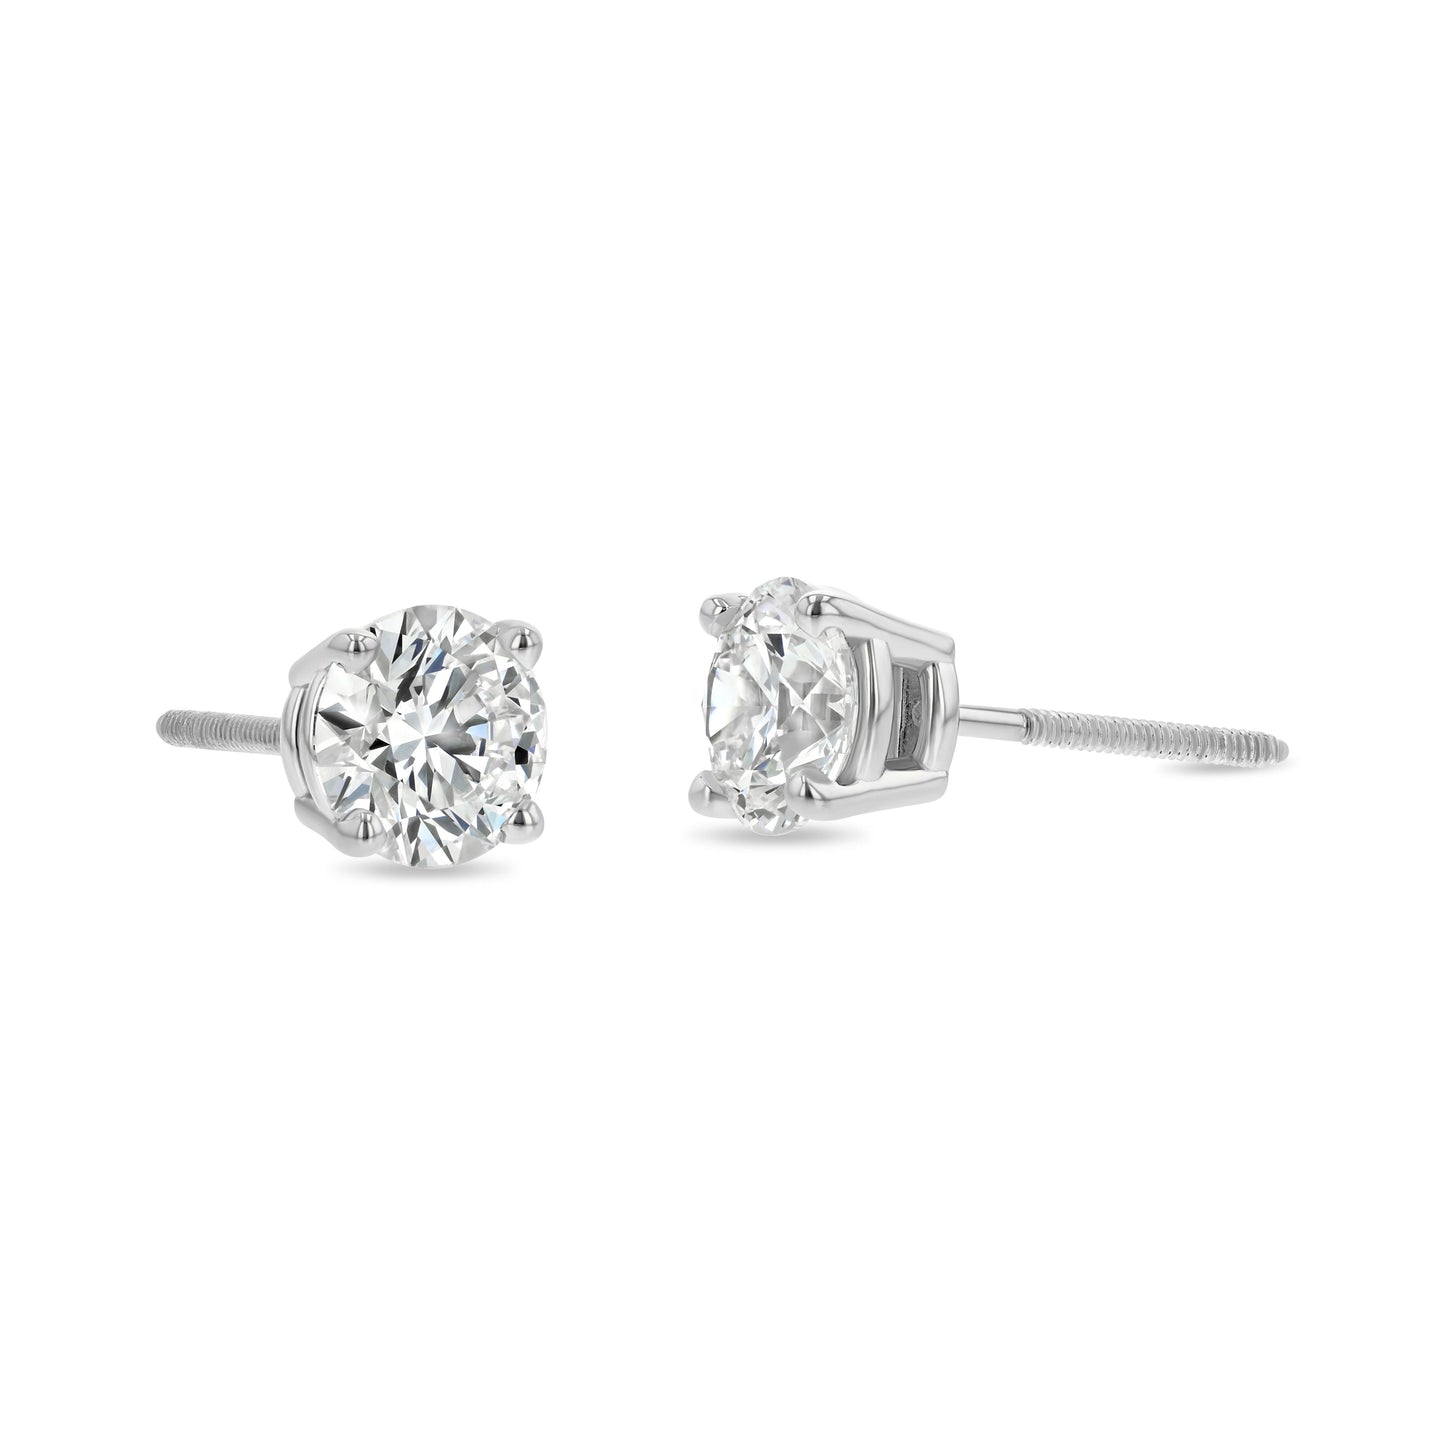 Platinum 4-prong Round Diamond Stud Earrings 1ctw (5.00mm Ea), H Color, Si3-i1 Clarity